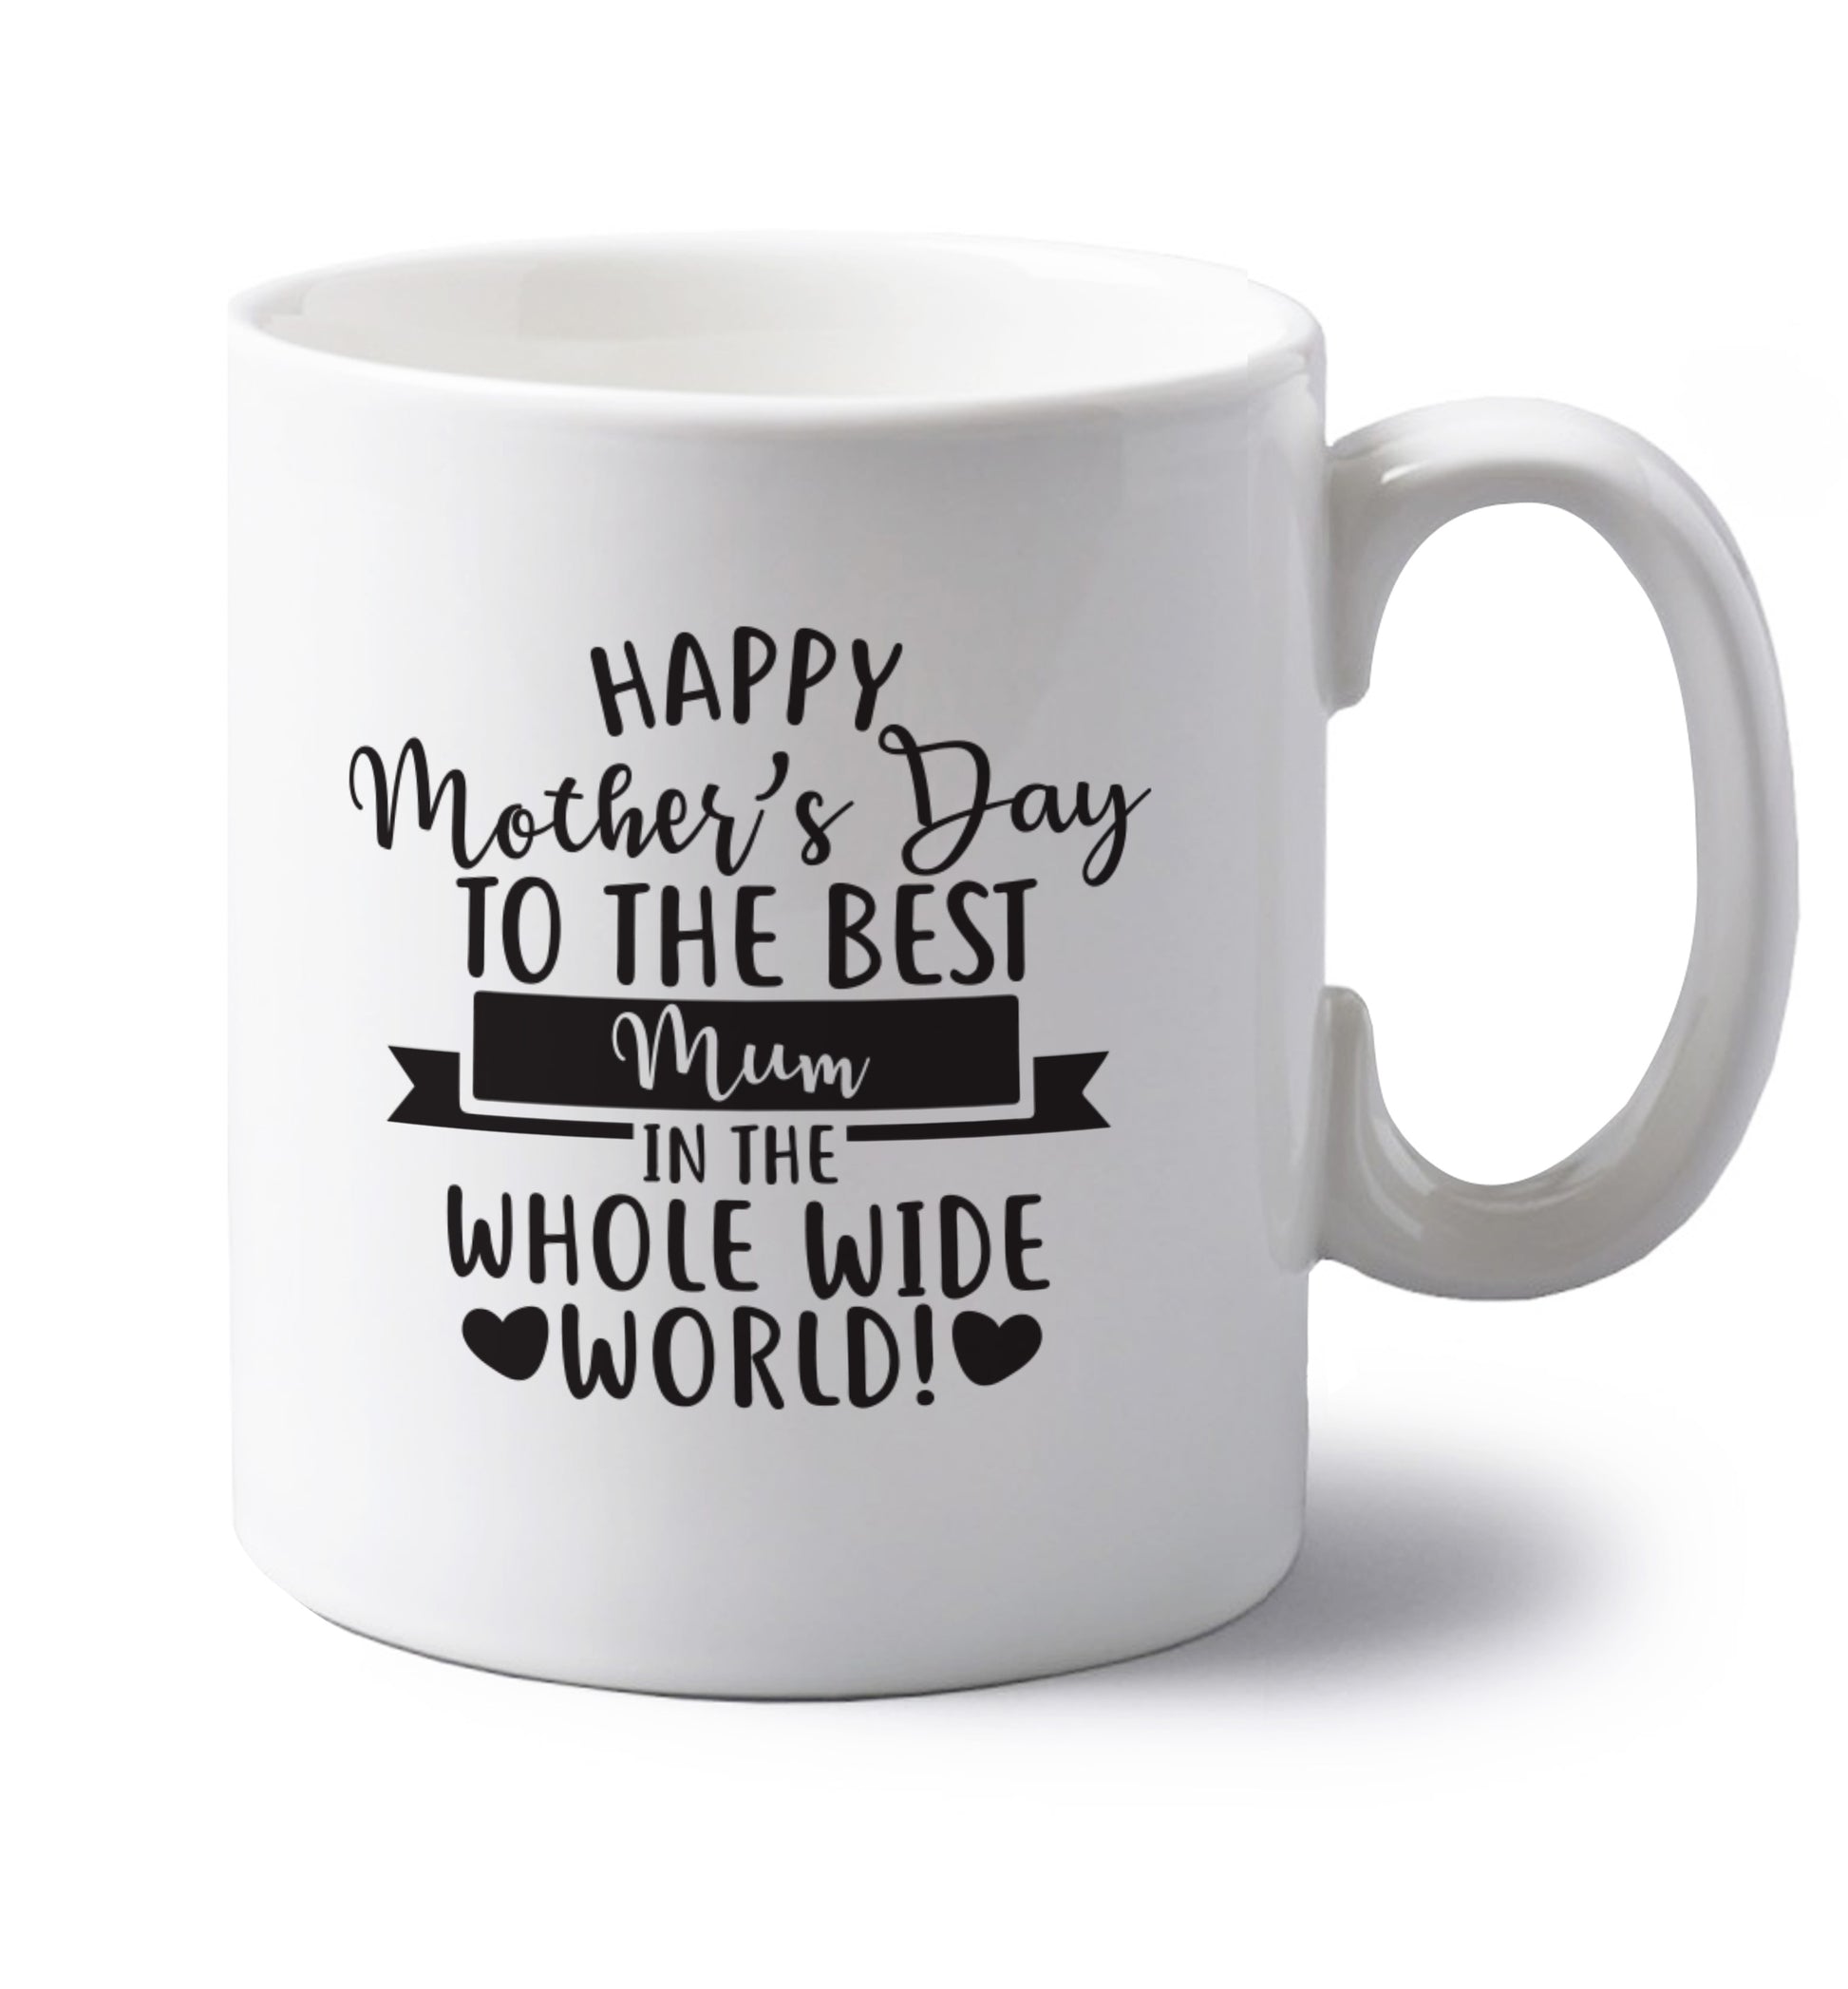 Happy Mother's Day to the best mum in the whole wide world! left handed white ceramic mug 